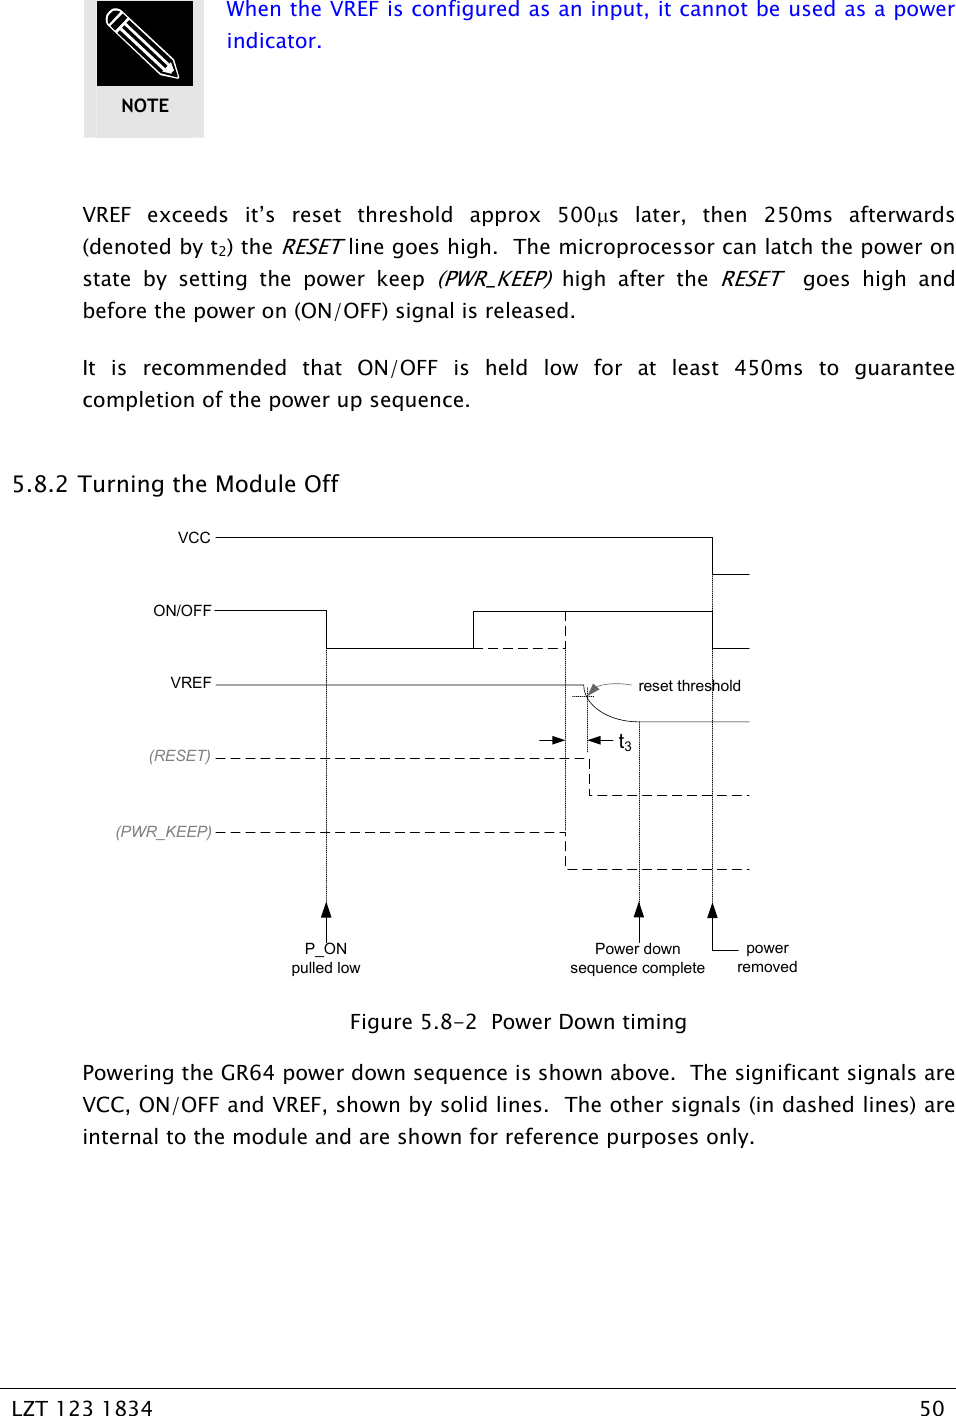   LZT 123 1834  50    When the VREF is configured as an input, it cannot be used as a power indicator.  VREF exceeds it’s reset threshold approx 500µs later, then 250ms afterwards (denoted by t2) the RESET line goes high.  The microprocessor can latch the power on state by setting the power keep (PWR_KEEP) high after the RESET  goes high and before the power on (ON/OFF) signal is released. It is recommended that ON/OFF is held low for at least 450ms to guarantee completion of the power up sequence.   5.8.2  Turning the Module Off VCCON/OFFVREF(RESET)(PWR_KEEP)reset thresholdt3P_ONpulled lowPower downsequence completepowerremoved  Figure 5.8-2  Power Down timing Powering the GR64 power down sequence is shown above.  The significant signals are VCC, ON/OFF and VREF, shown by solid lines.  The other signals (in dashed lines) are internal to the module and are shown for reference purposes only. NOTE